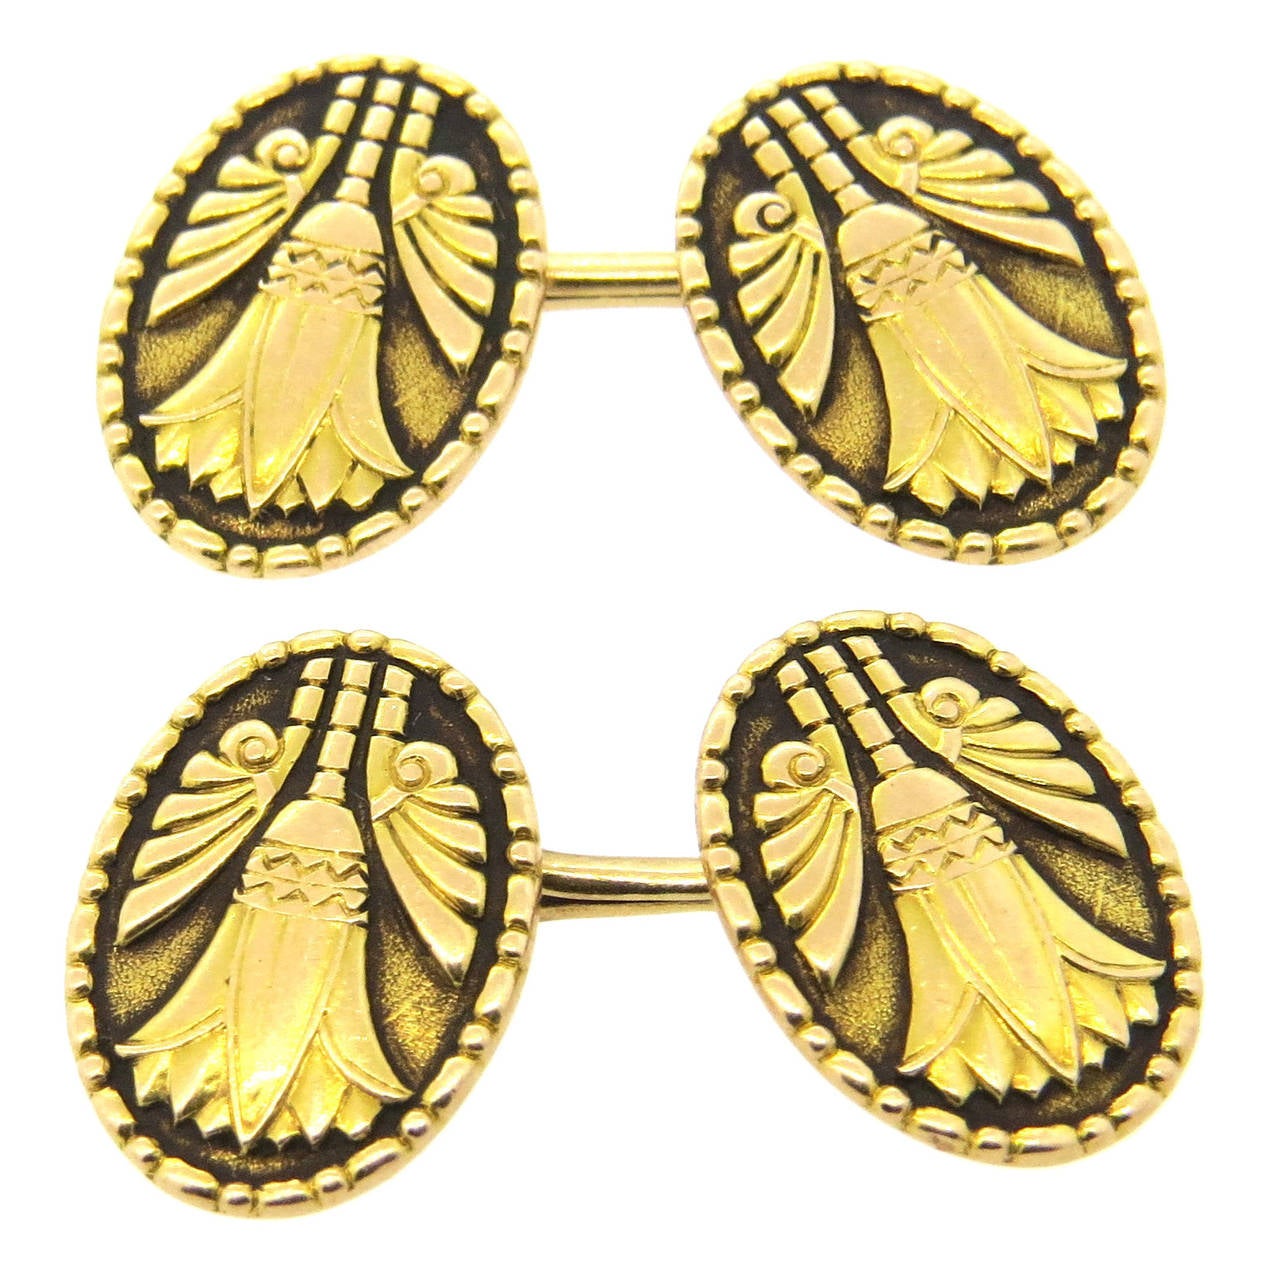 1920s Marcus & Co. Aesthetic Movement Gold Cufflinks